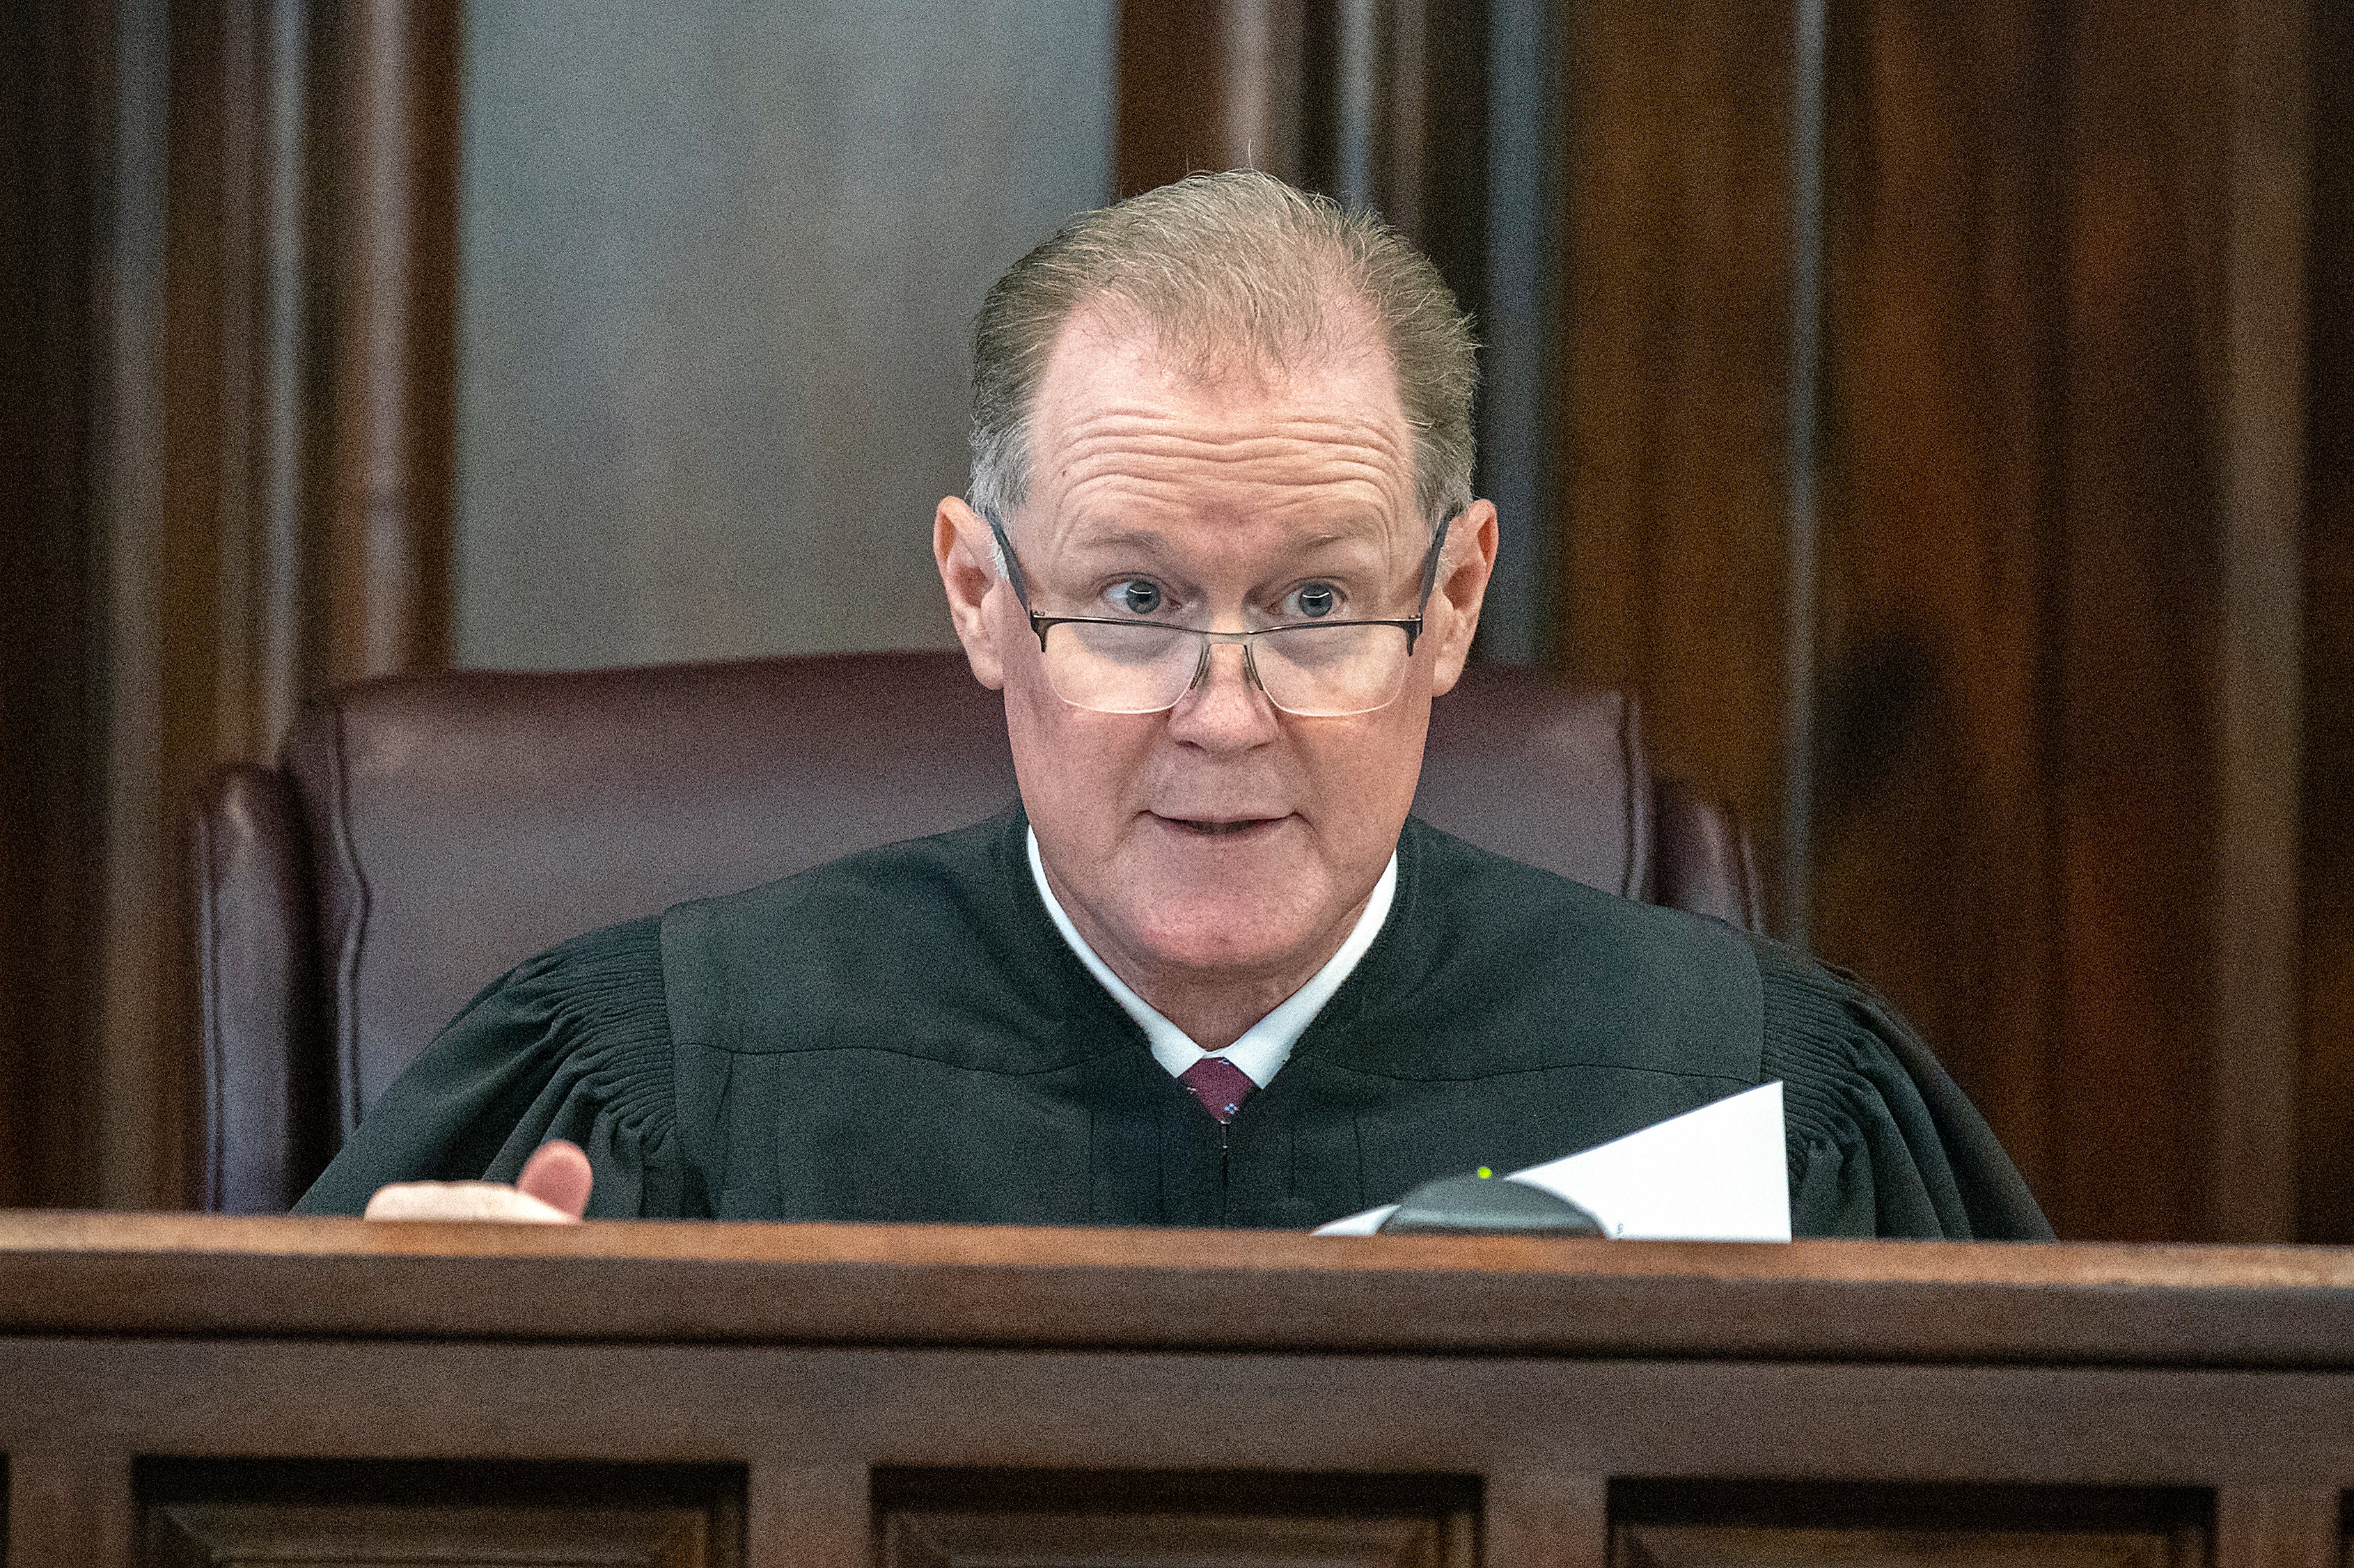 Judge Timothy Walmsley agreed that there was “intentional discrimination” from the defense in jury selection but allowed the trial to go ahead